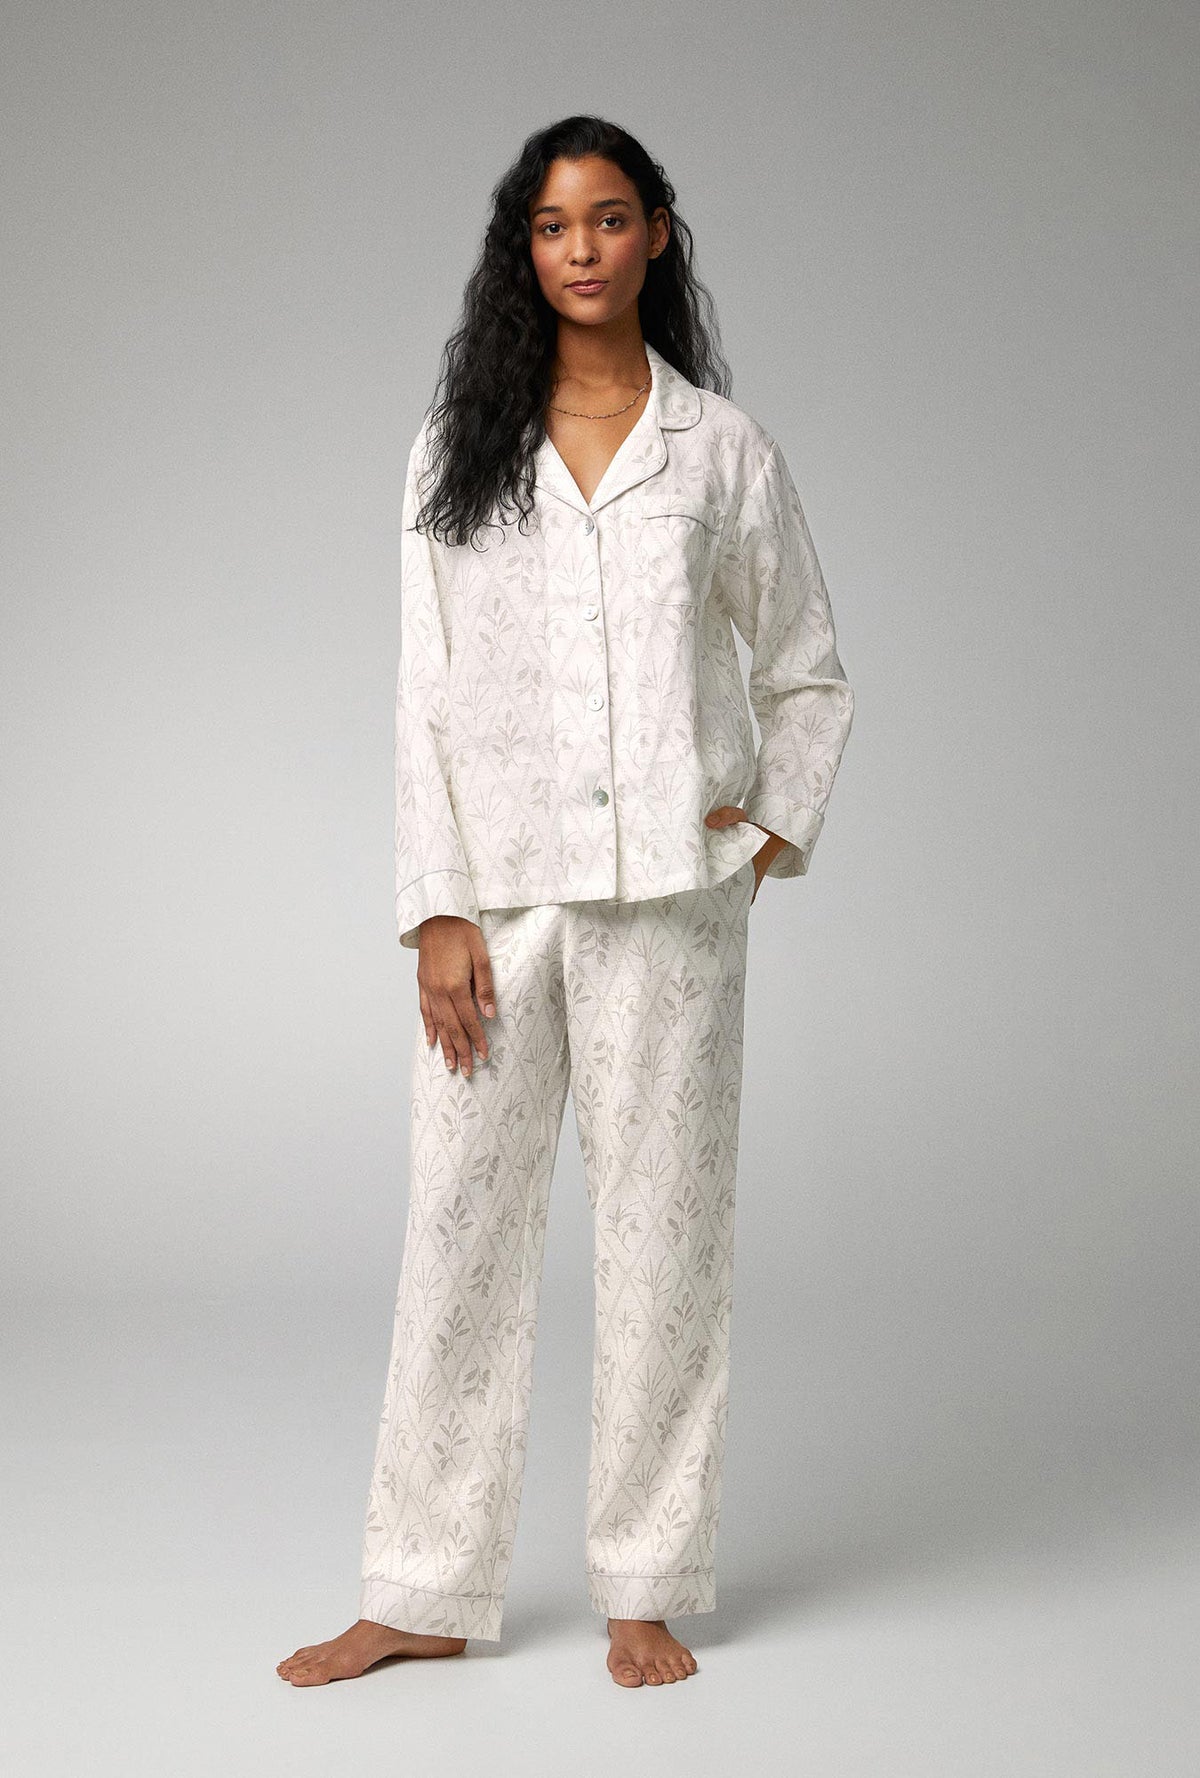 A lady wearing Long Sleeve Classic Woven Linen PJ Set with Botanical Studies print